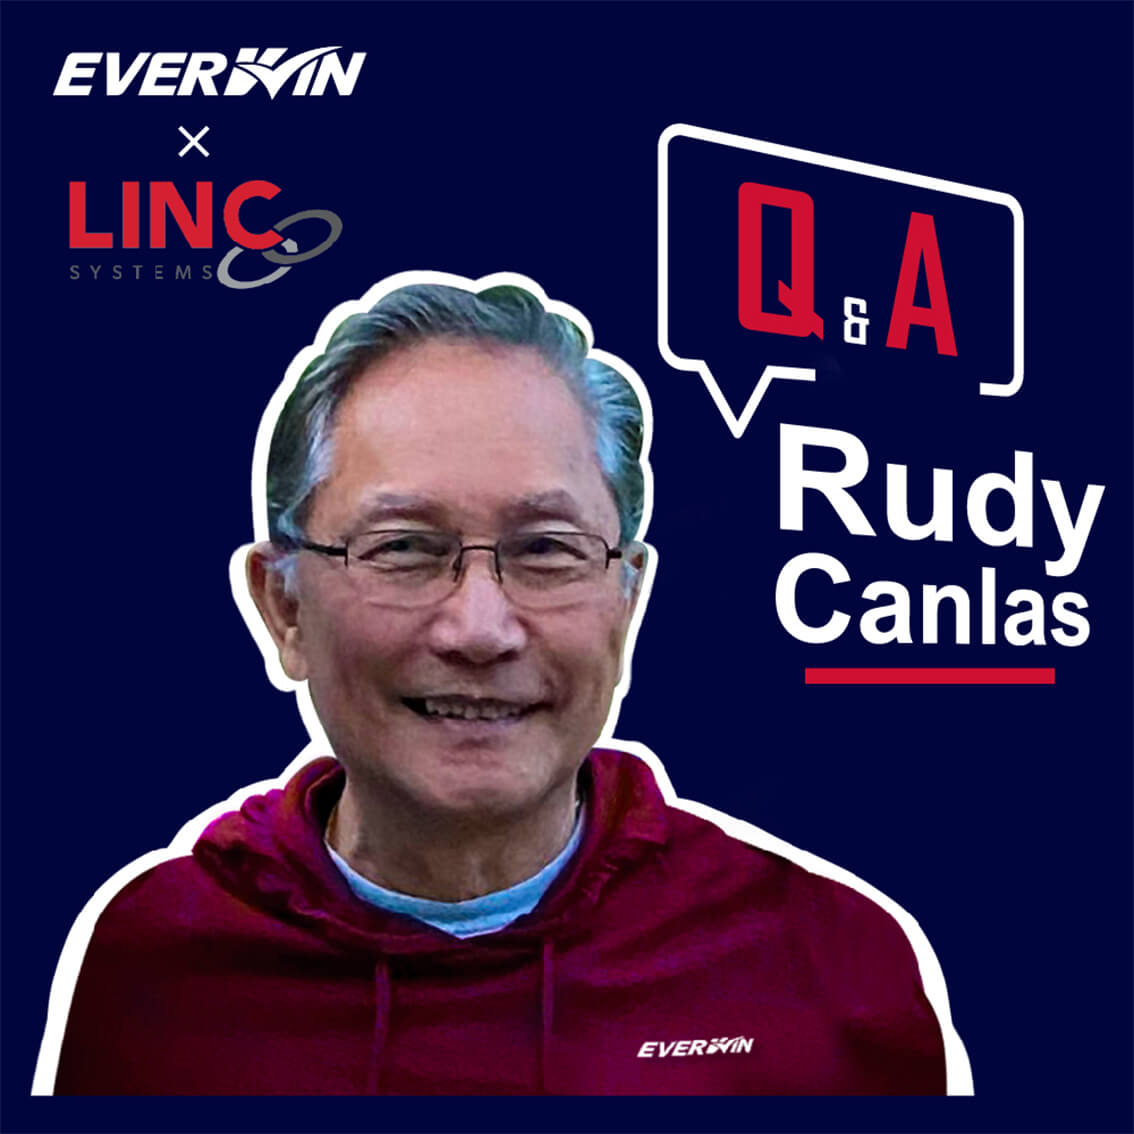 Q&A with Everwin's Rudy Canlas